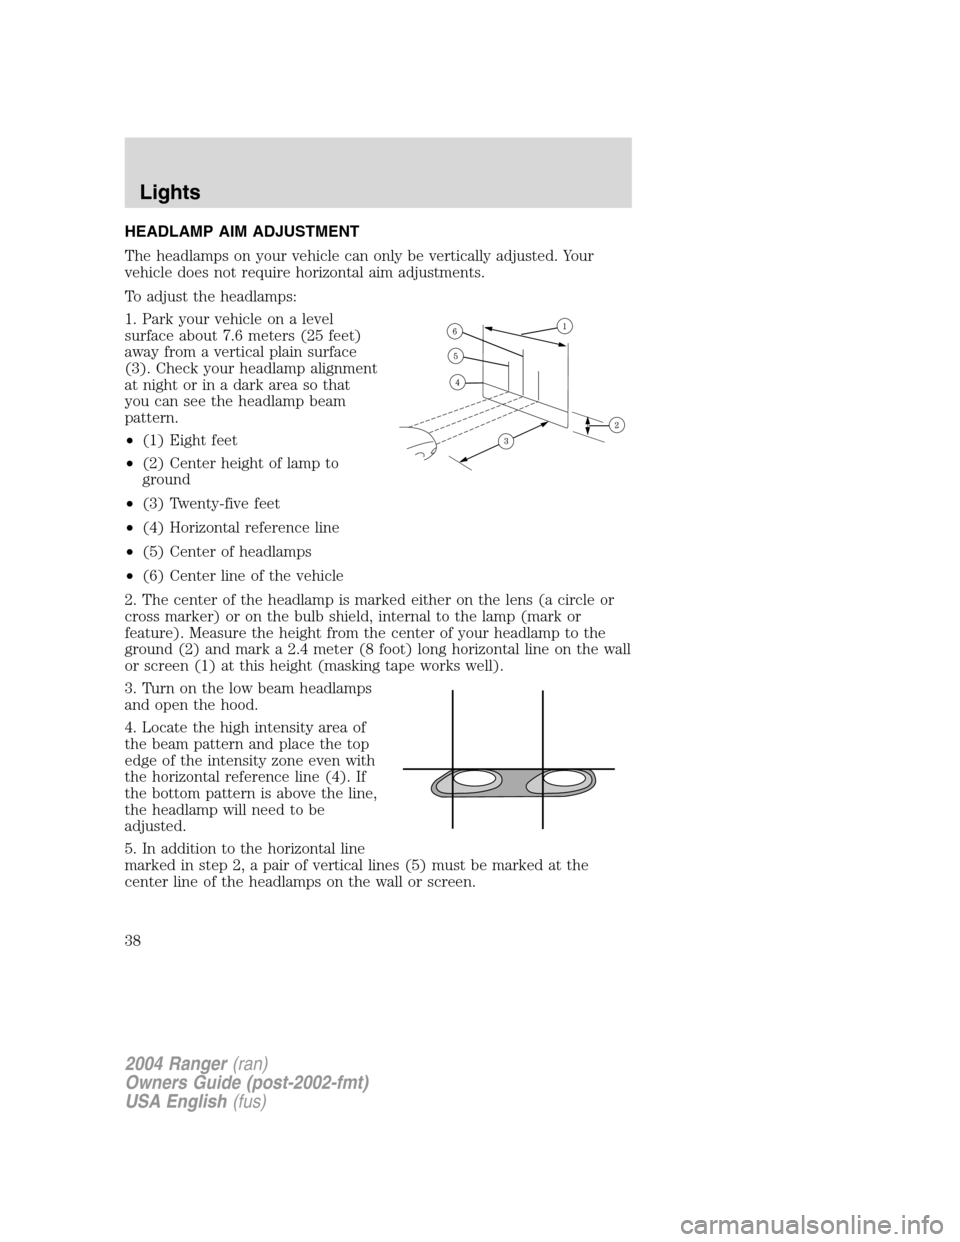 FORD RANGER 2004 2.G Owners Manual HEADLAMP AIM ADJUSTMENT
The headlamps on your vehicle can only be vertically adjusted. Your
vehicle does not require horizontal aim adjustments.
To adjust the headlamps:
1. Park your vehicle on a leve